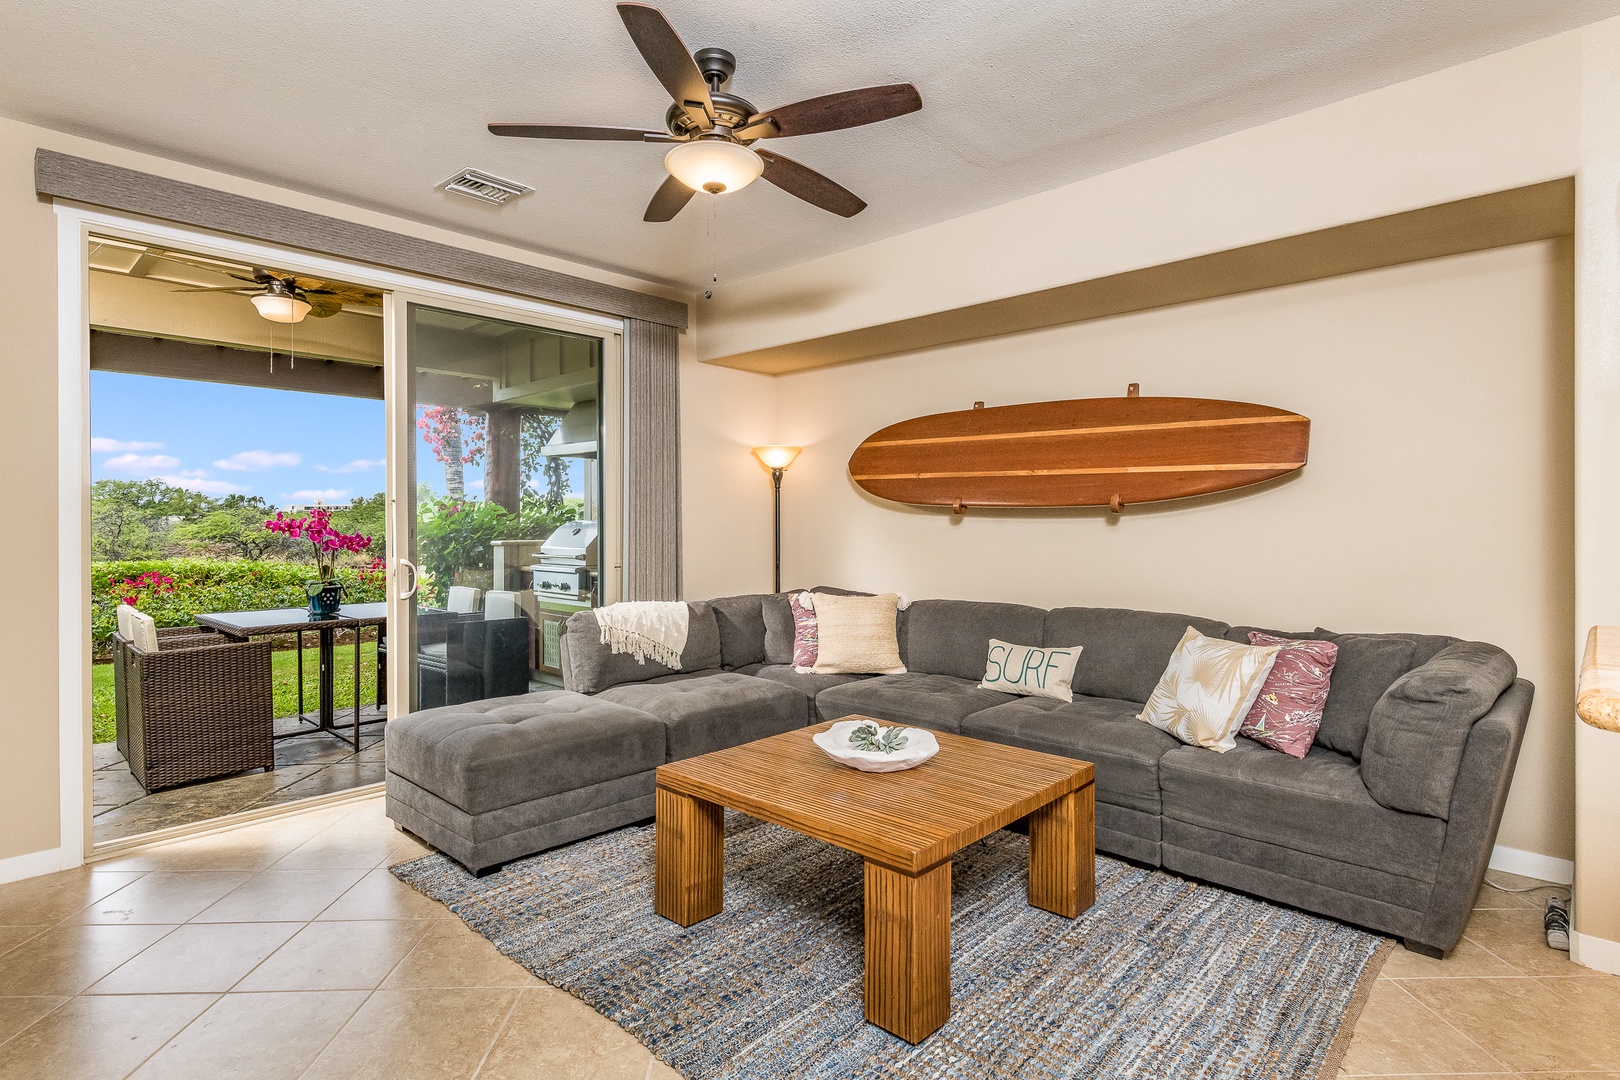 Kamuela Vacation Rentals, Palm Villas E1 - The professionally decorated space is bathed in natural light, thanks to the large windows that frame the beautiful ocean view.